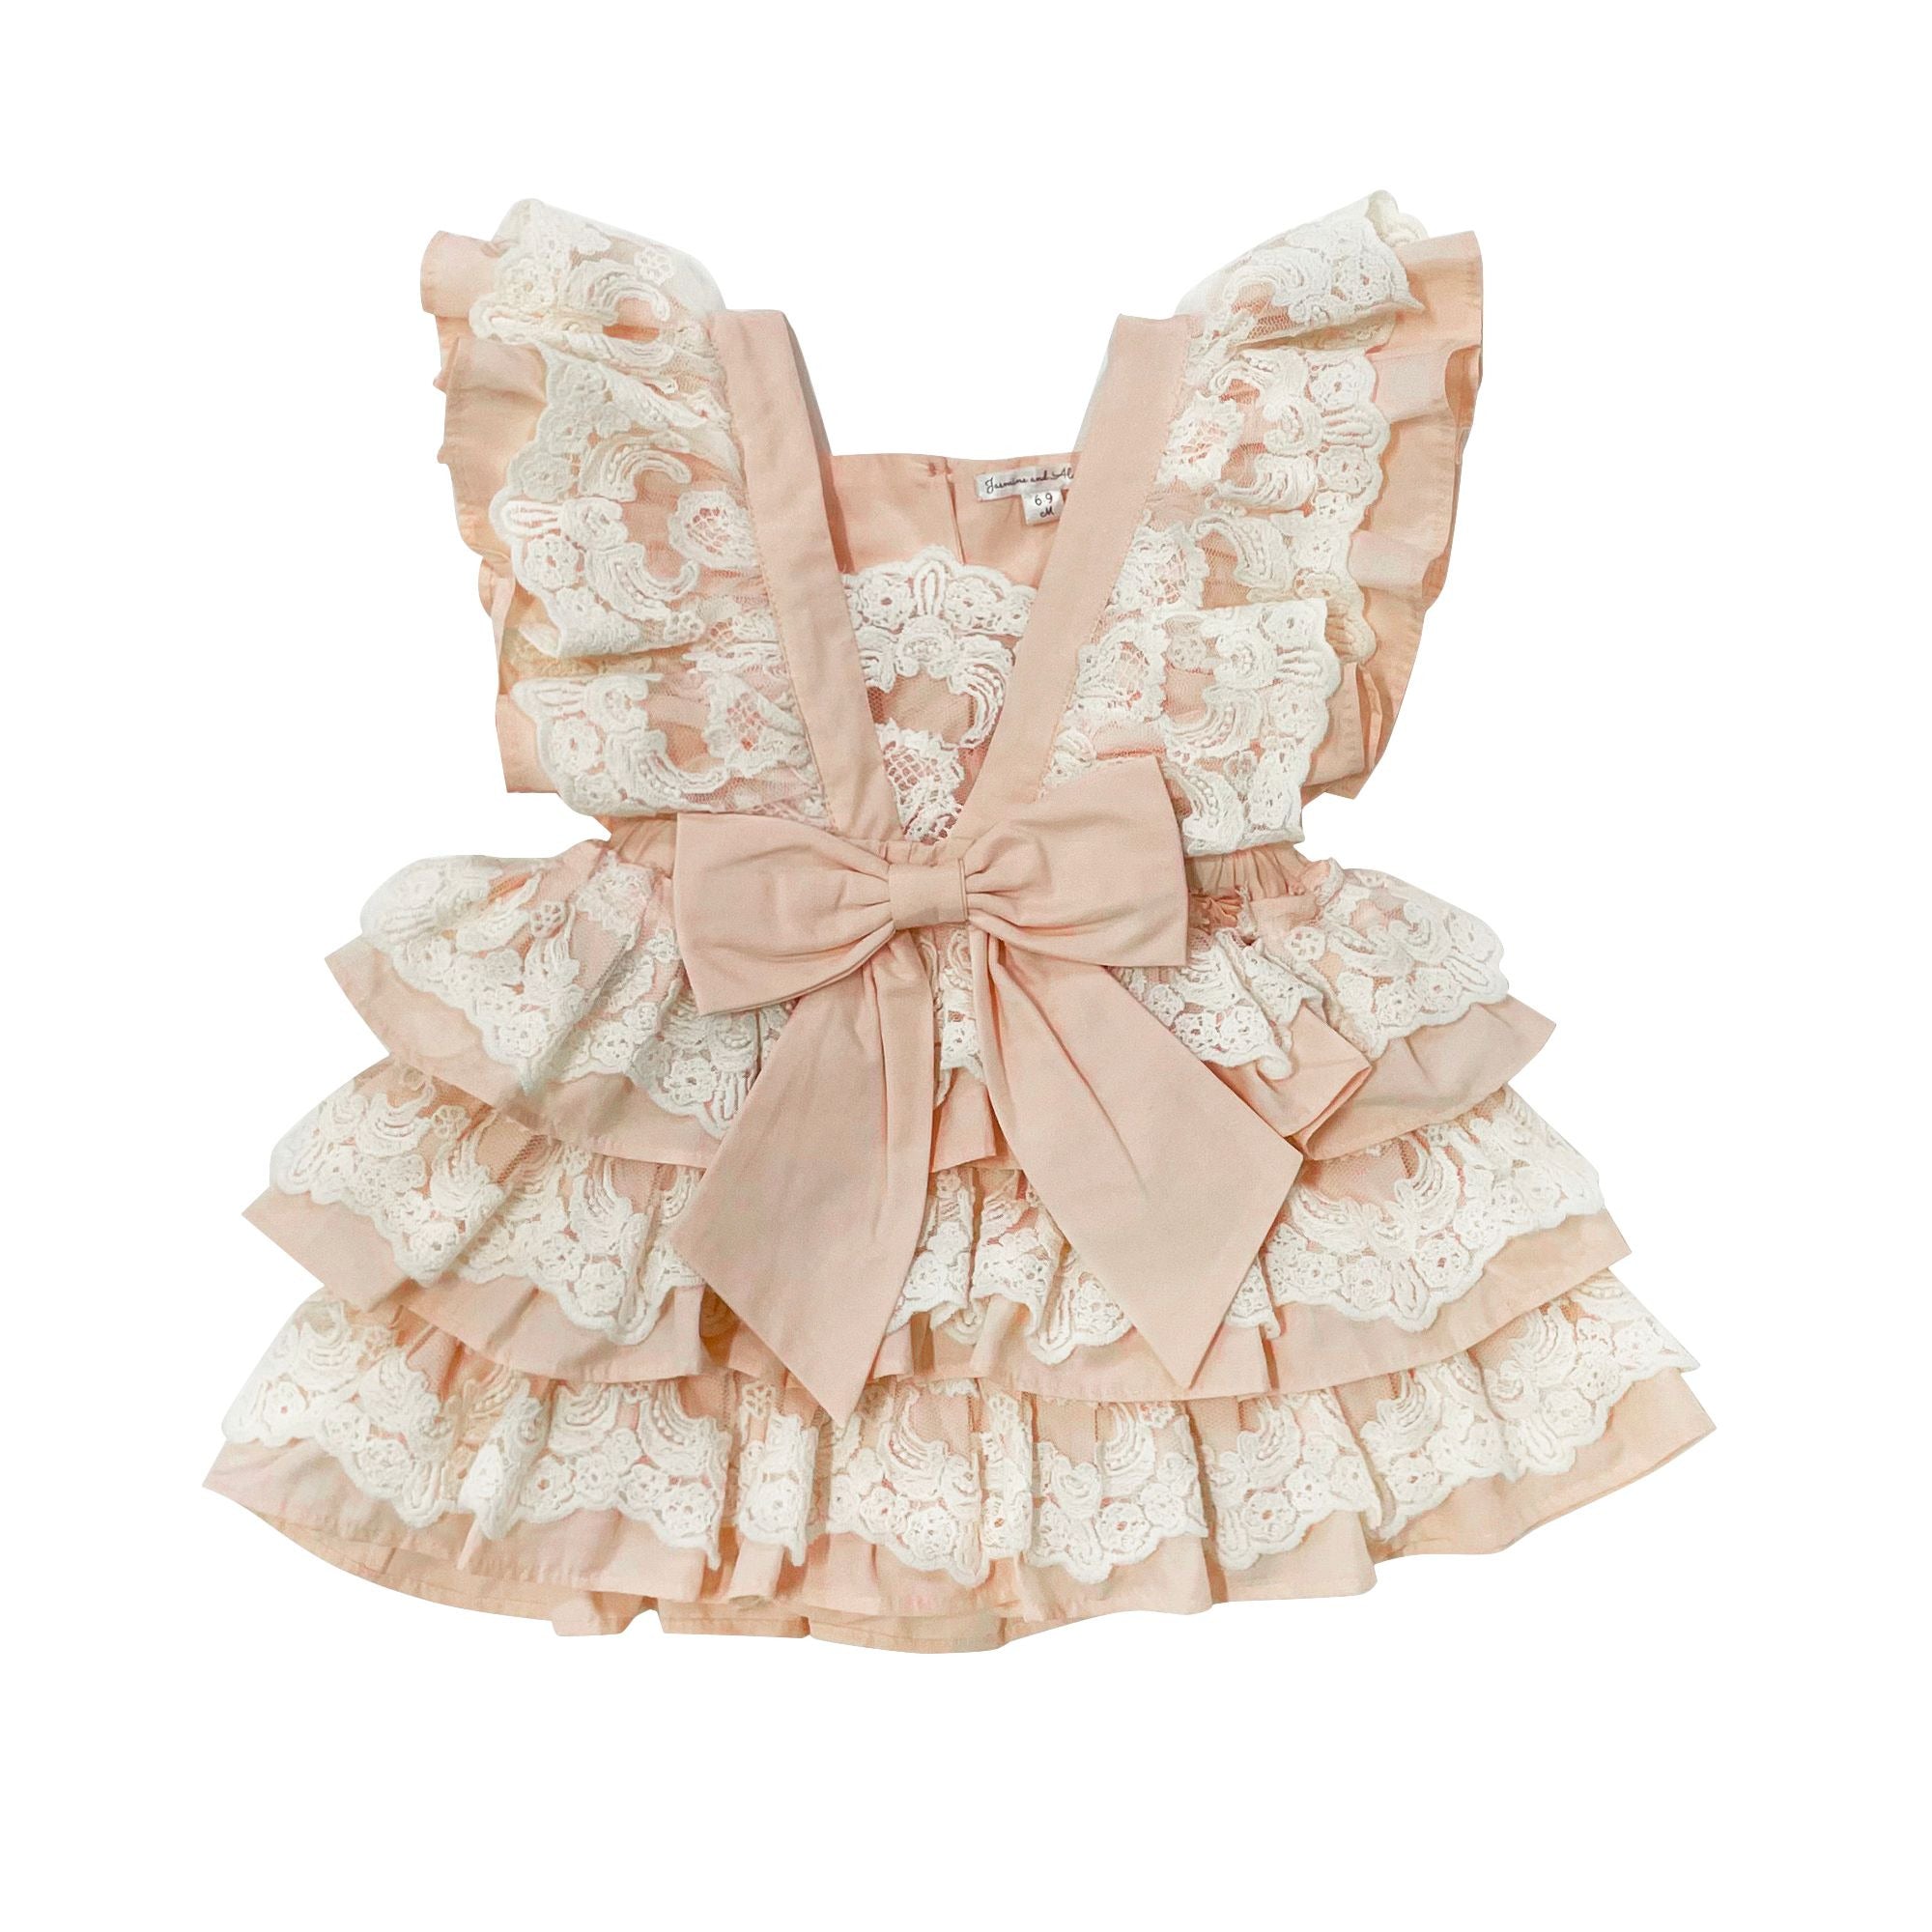 The Lacy Cotton Frill Dress (Peach)